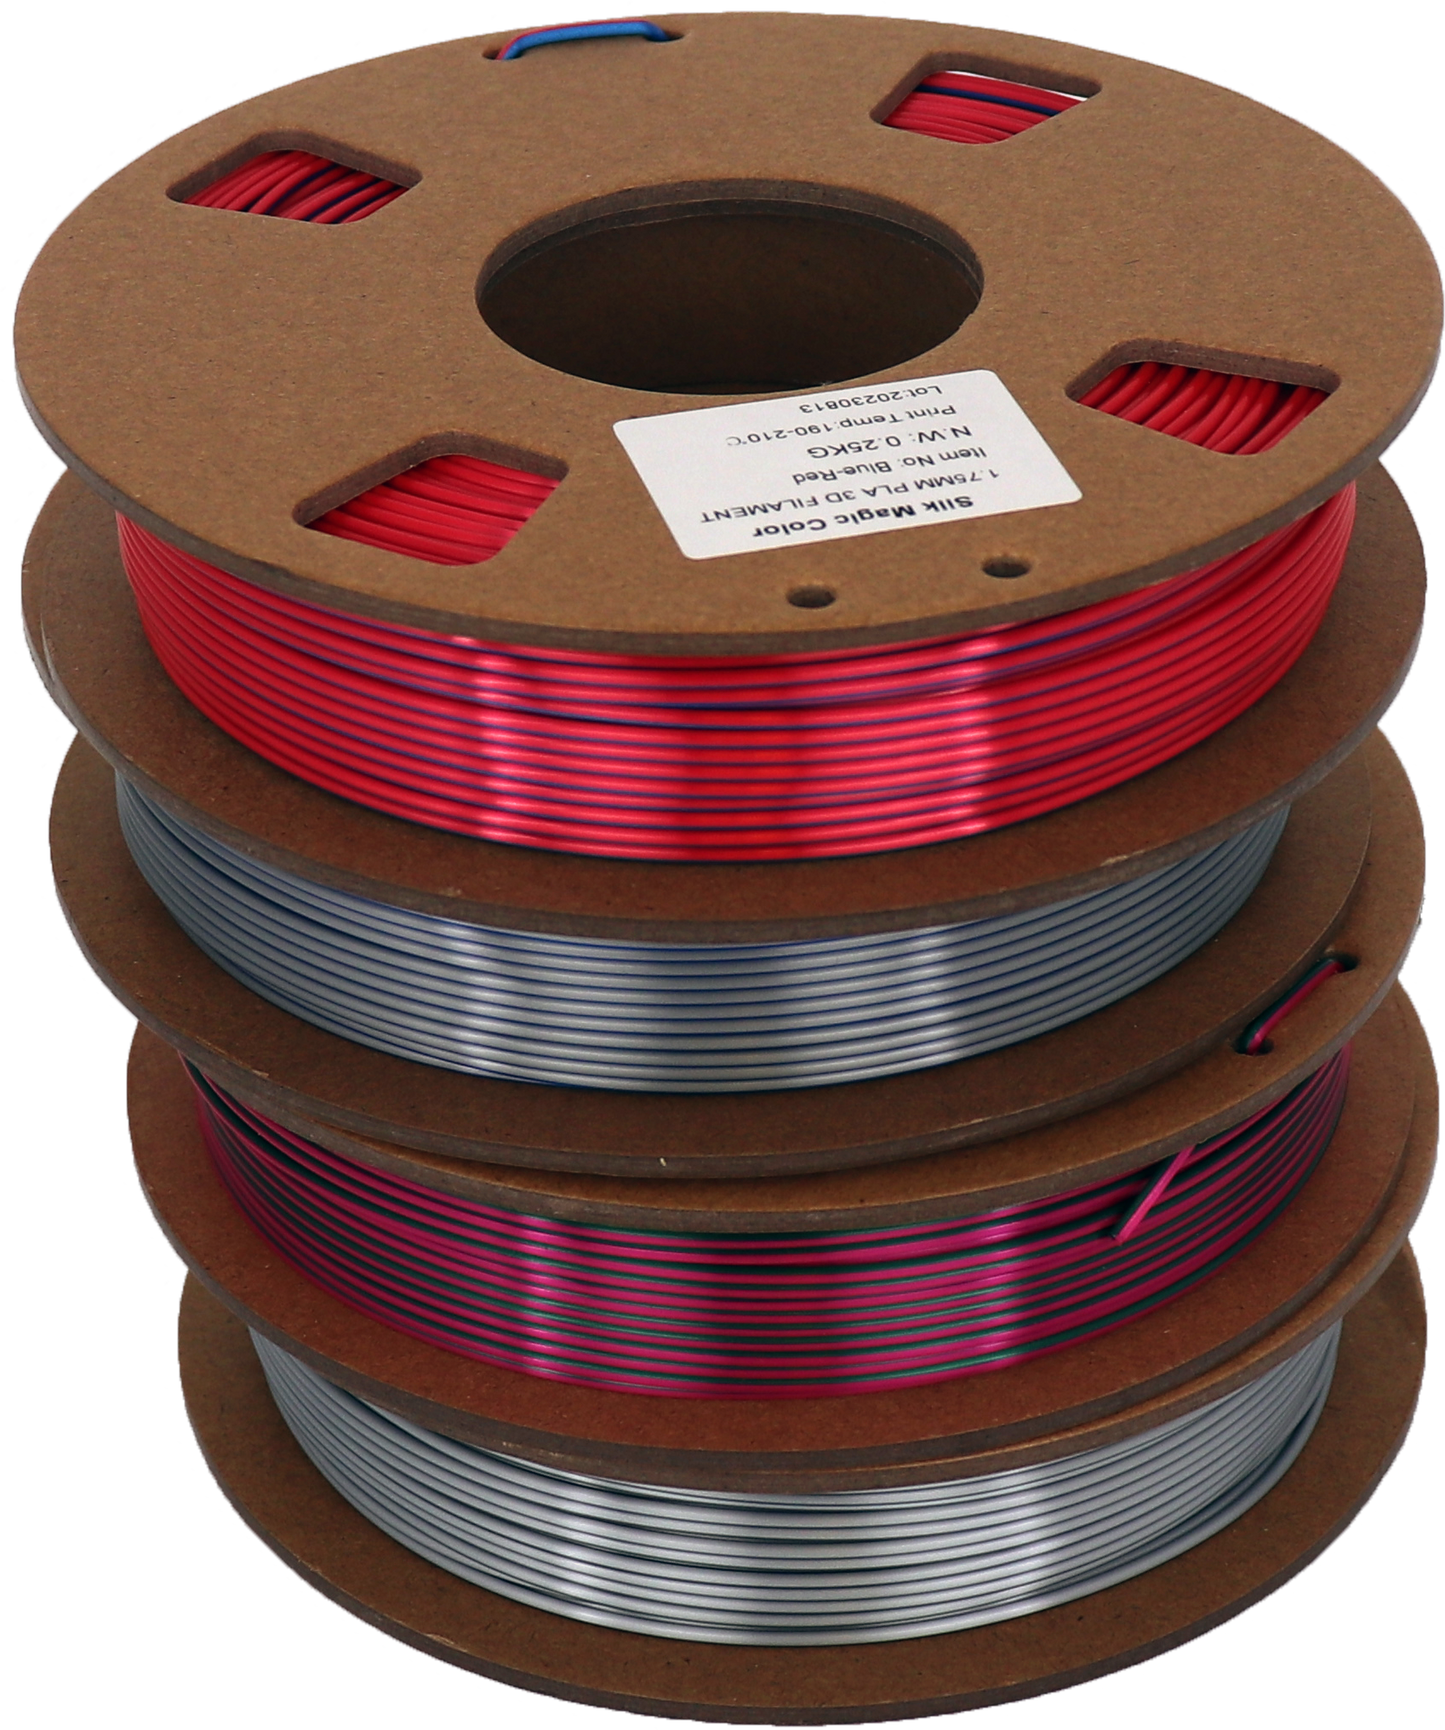 PS Imports PLA 1.75mm x Sample Packs Dual Color